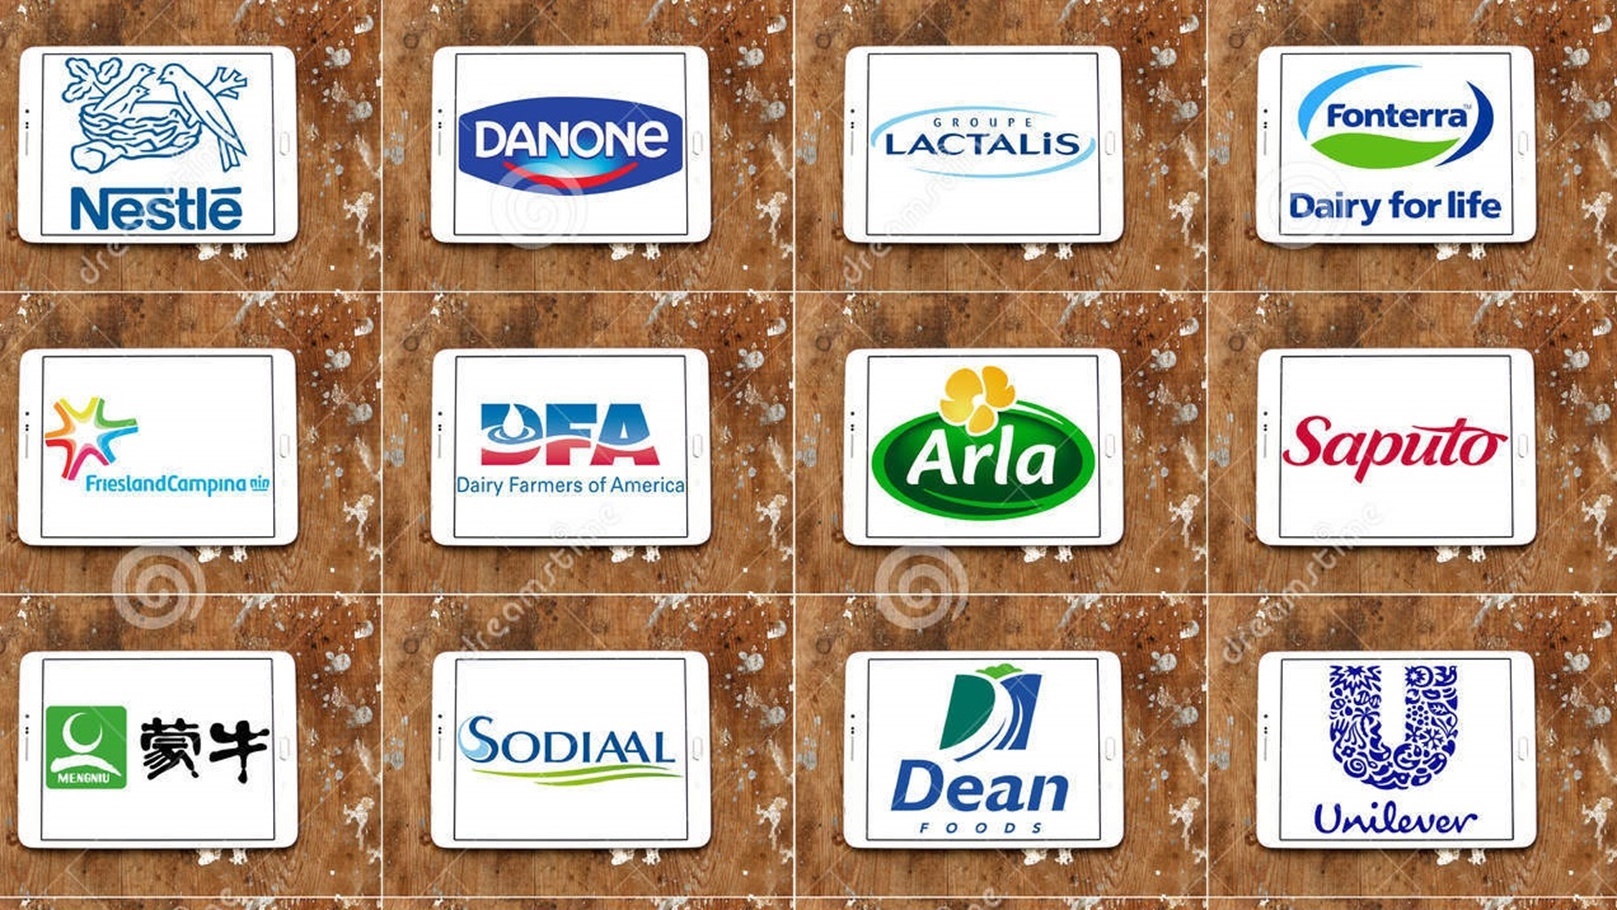 top-global-dairy-companies-logos-collection-famous-brands-vectors-white-tablet-wooden-background-69829043